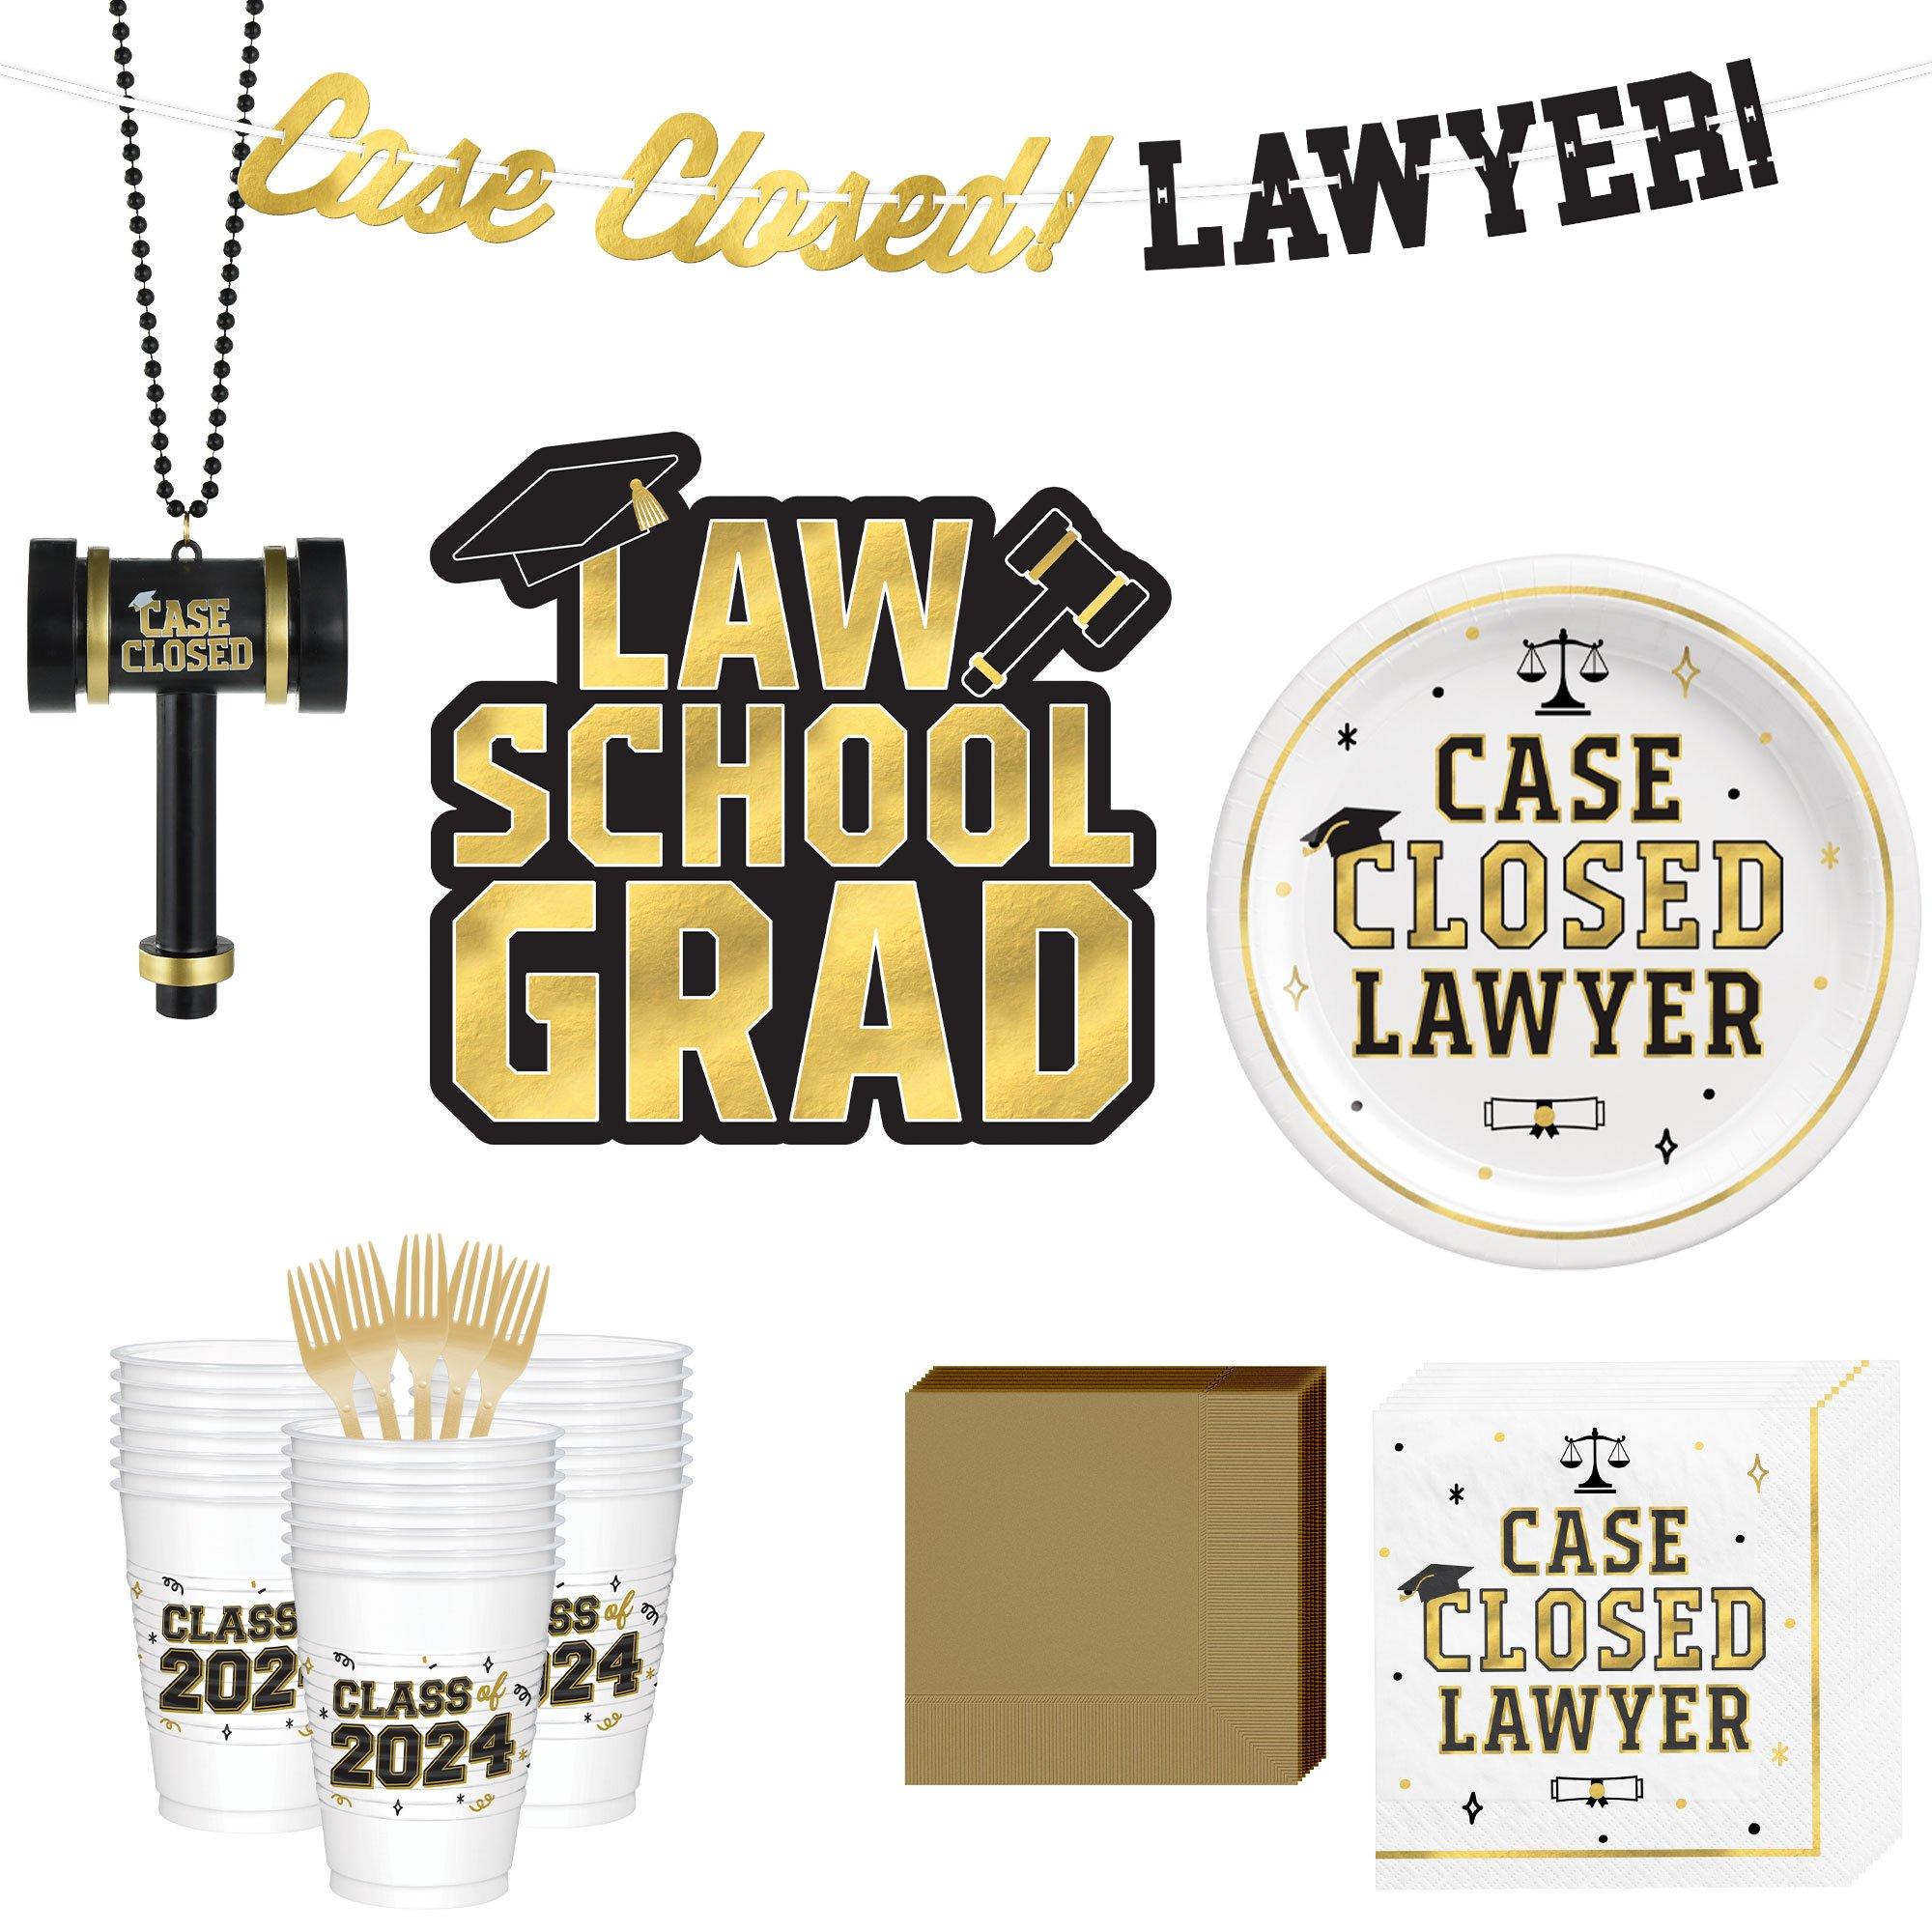 Graduation Party Supplies Kit for 30 with Decorations, Banners, Plates, Napkins, Cups - Case Closed Lawyer